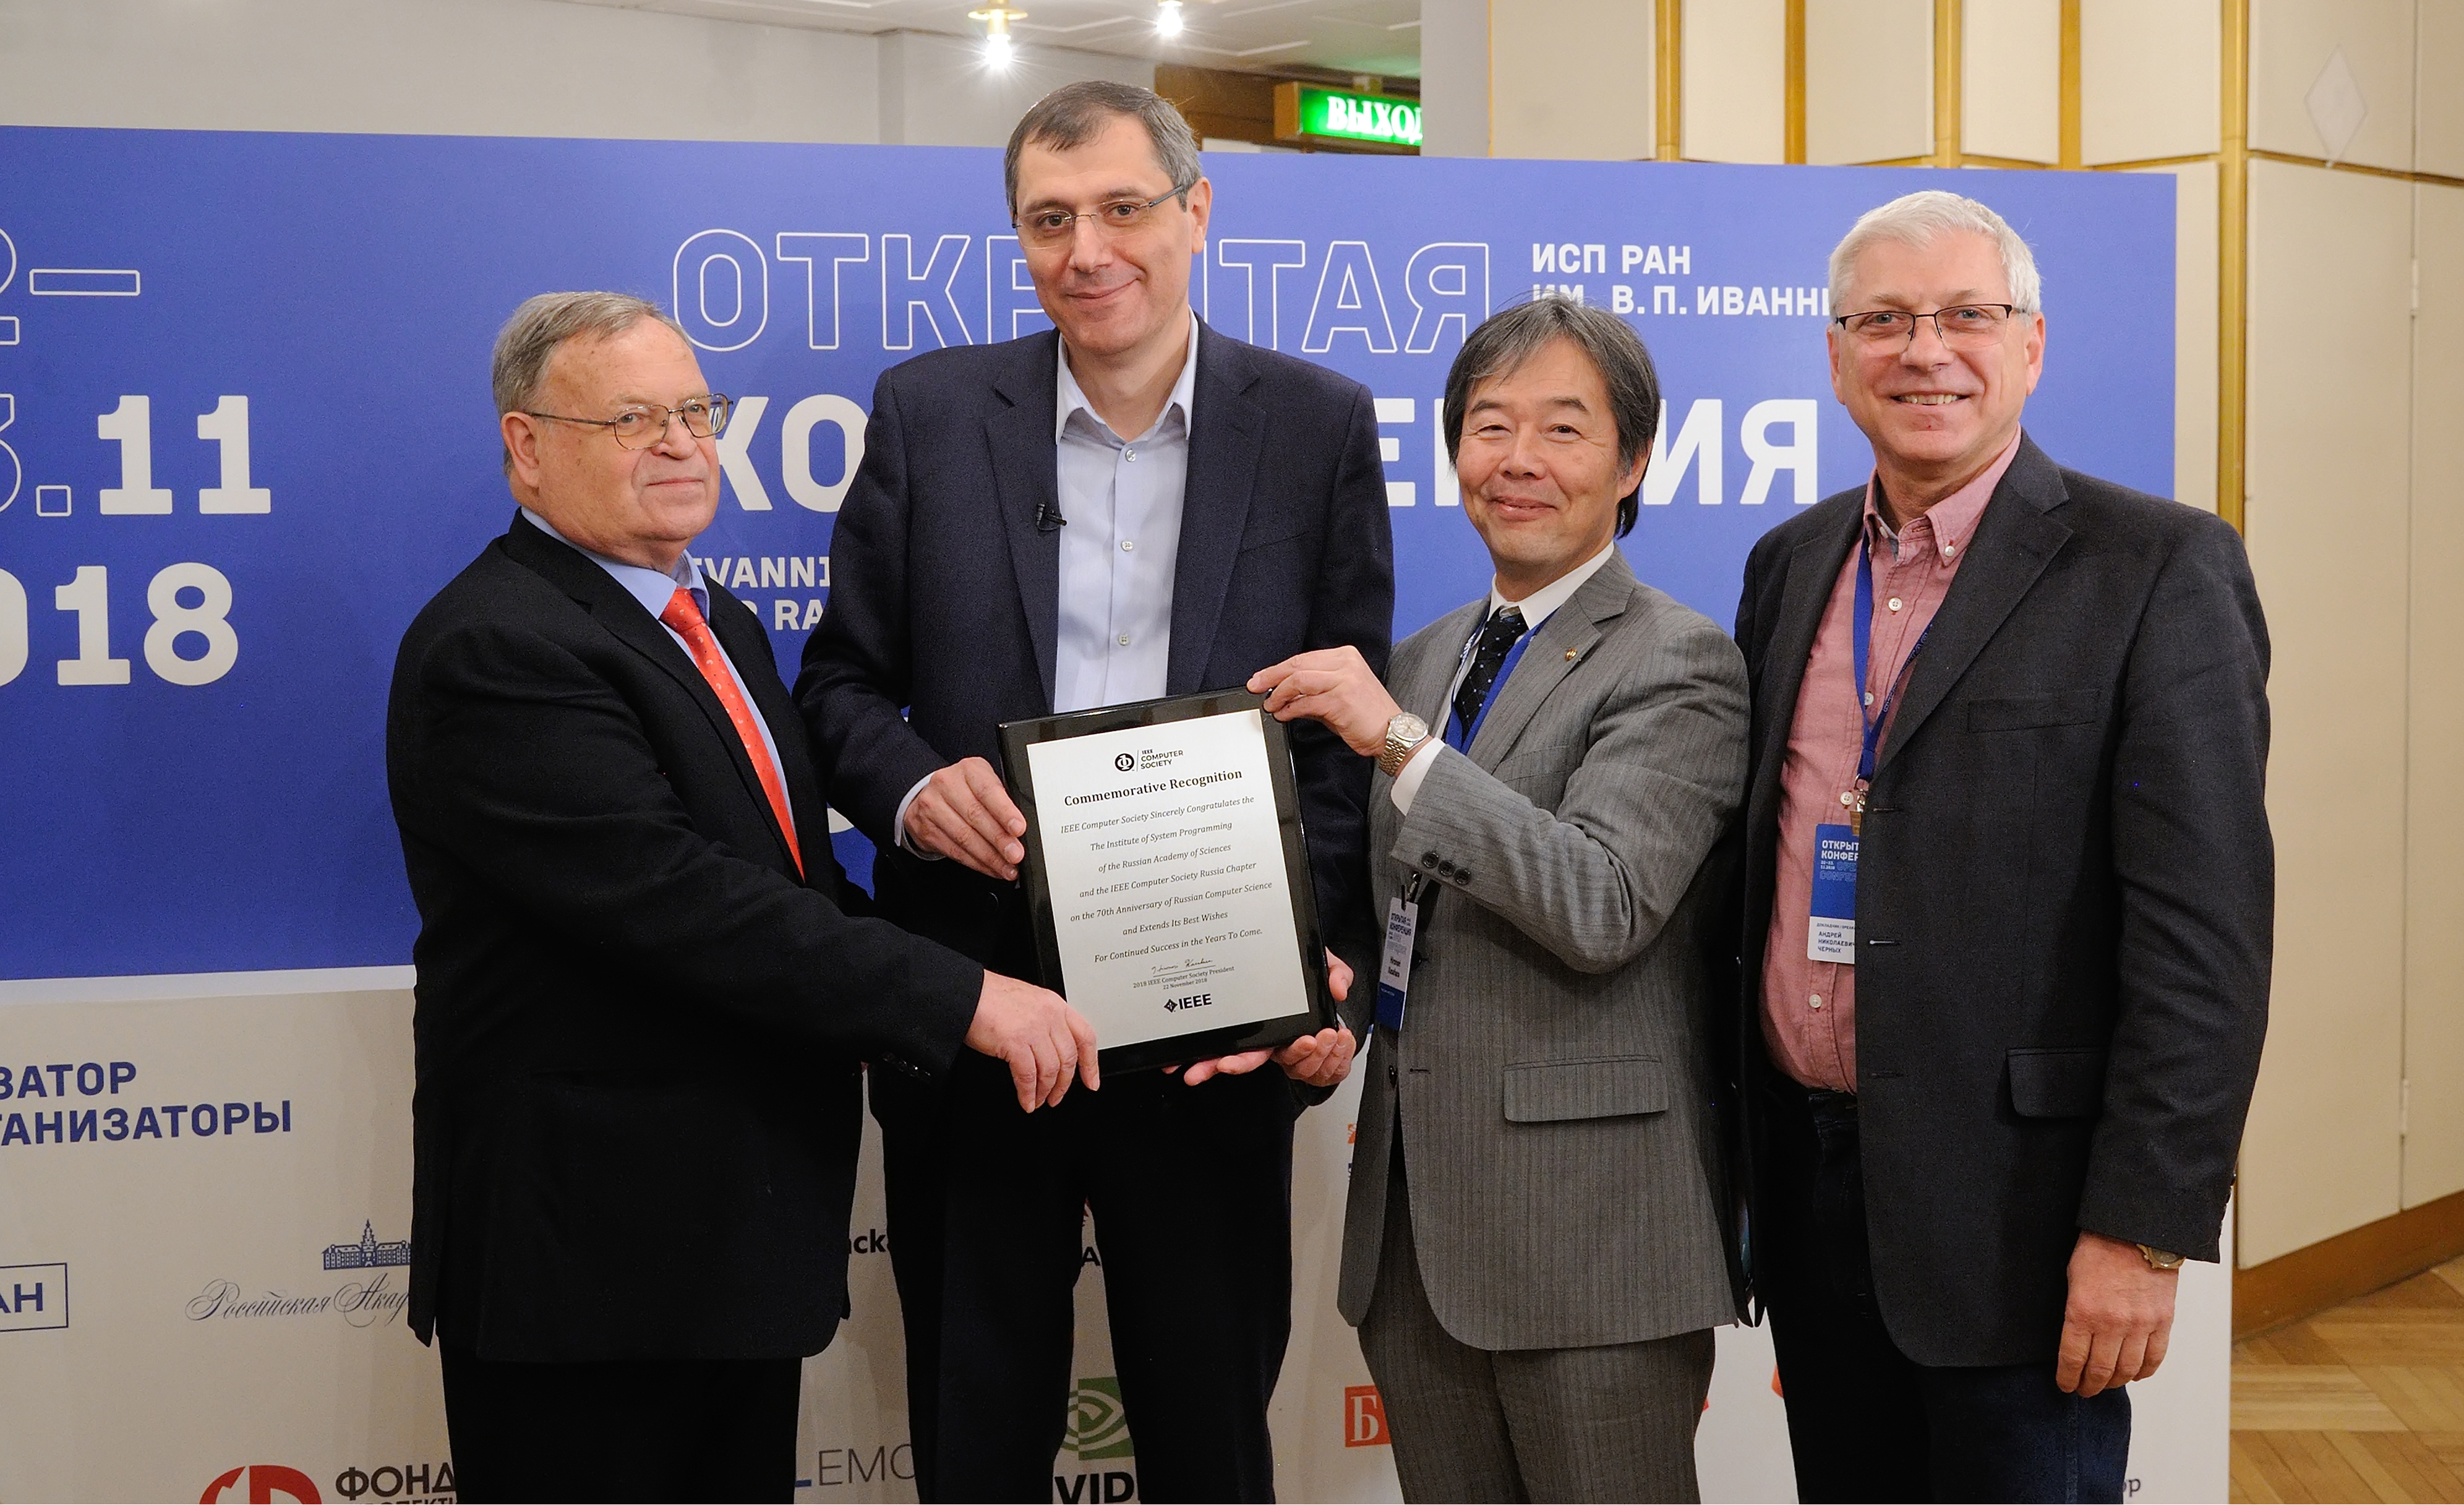 The IEEE Computer Society extends a commemorative placque to Russia and the society's Russia chapter on the 70th anniversary of computer science in that country. Pictured are: Dr. Sergei Prokhorov (CS Russian Chapter Chair), Prof. Arutyun I. Avetisyan (ISP Director), Prof. Hironori Kasahara (CS President), Dr. Andrei Tchernykh (Mexico CICESE).